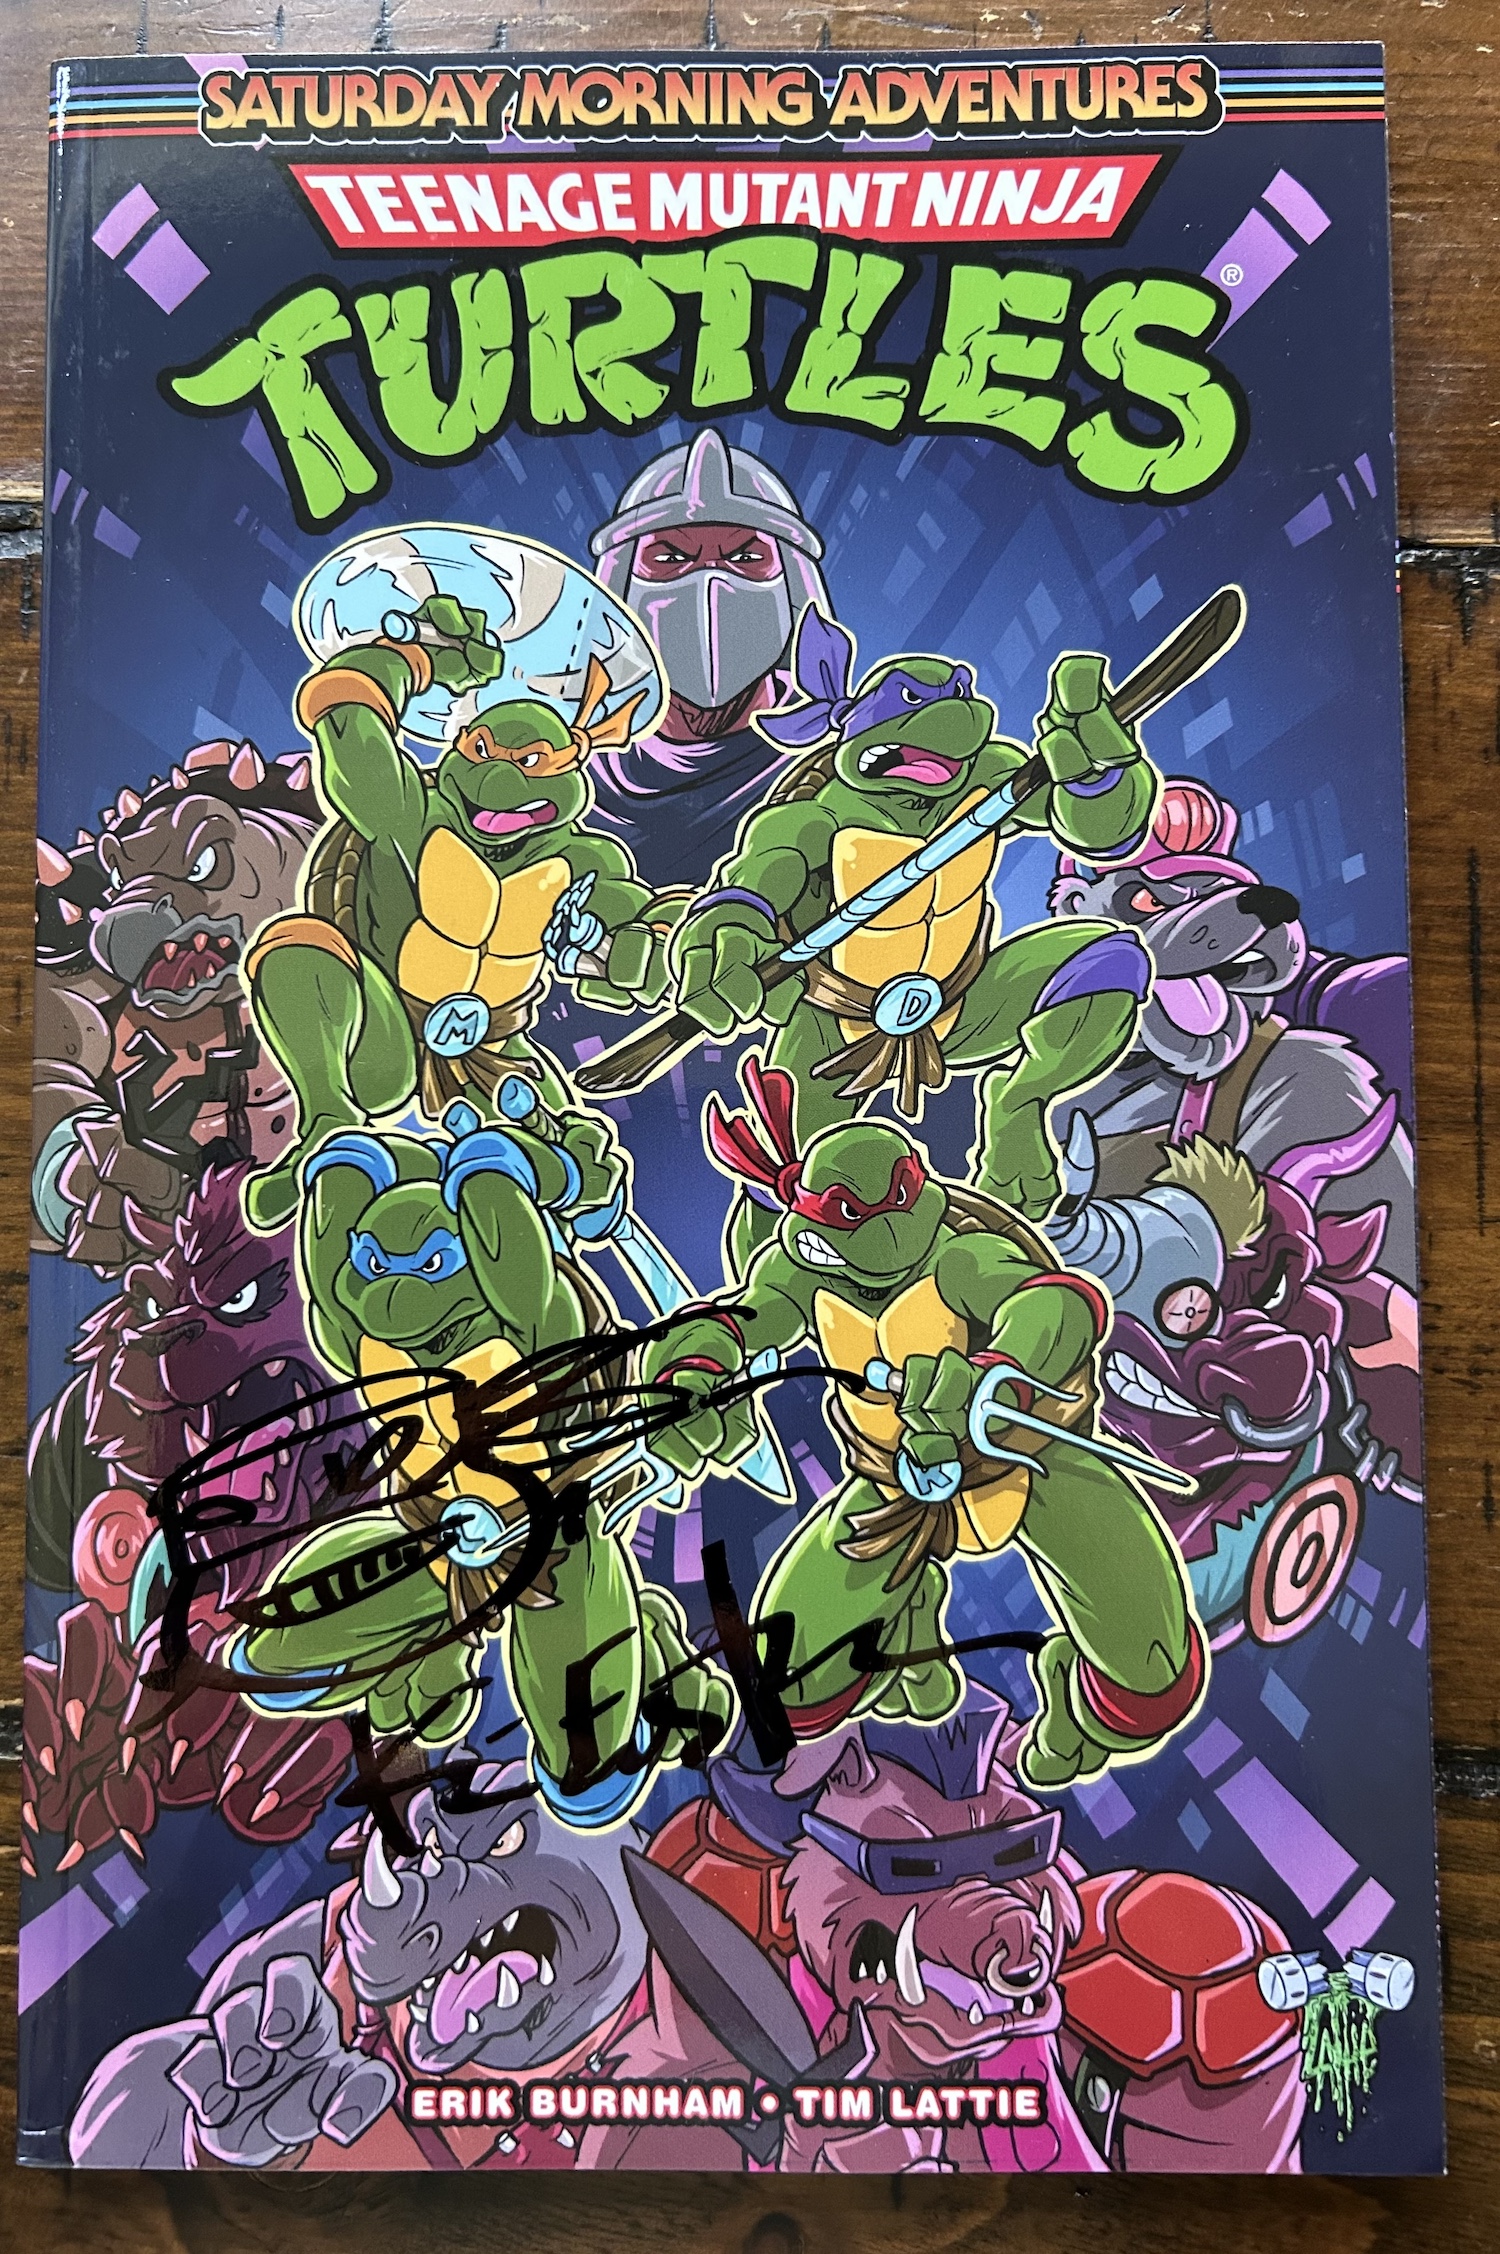 Read more about the article TMNT Saturday Morning Adventures